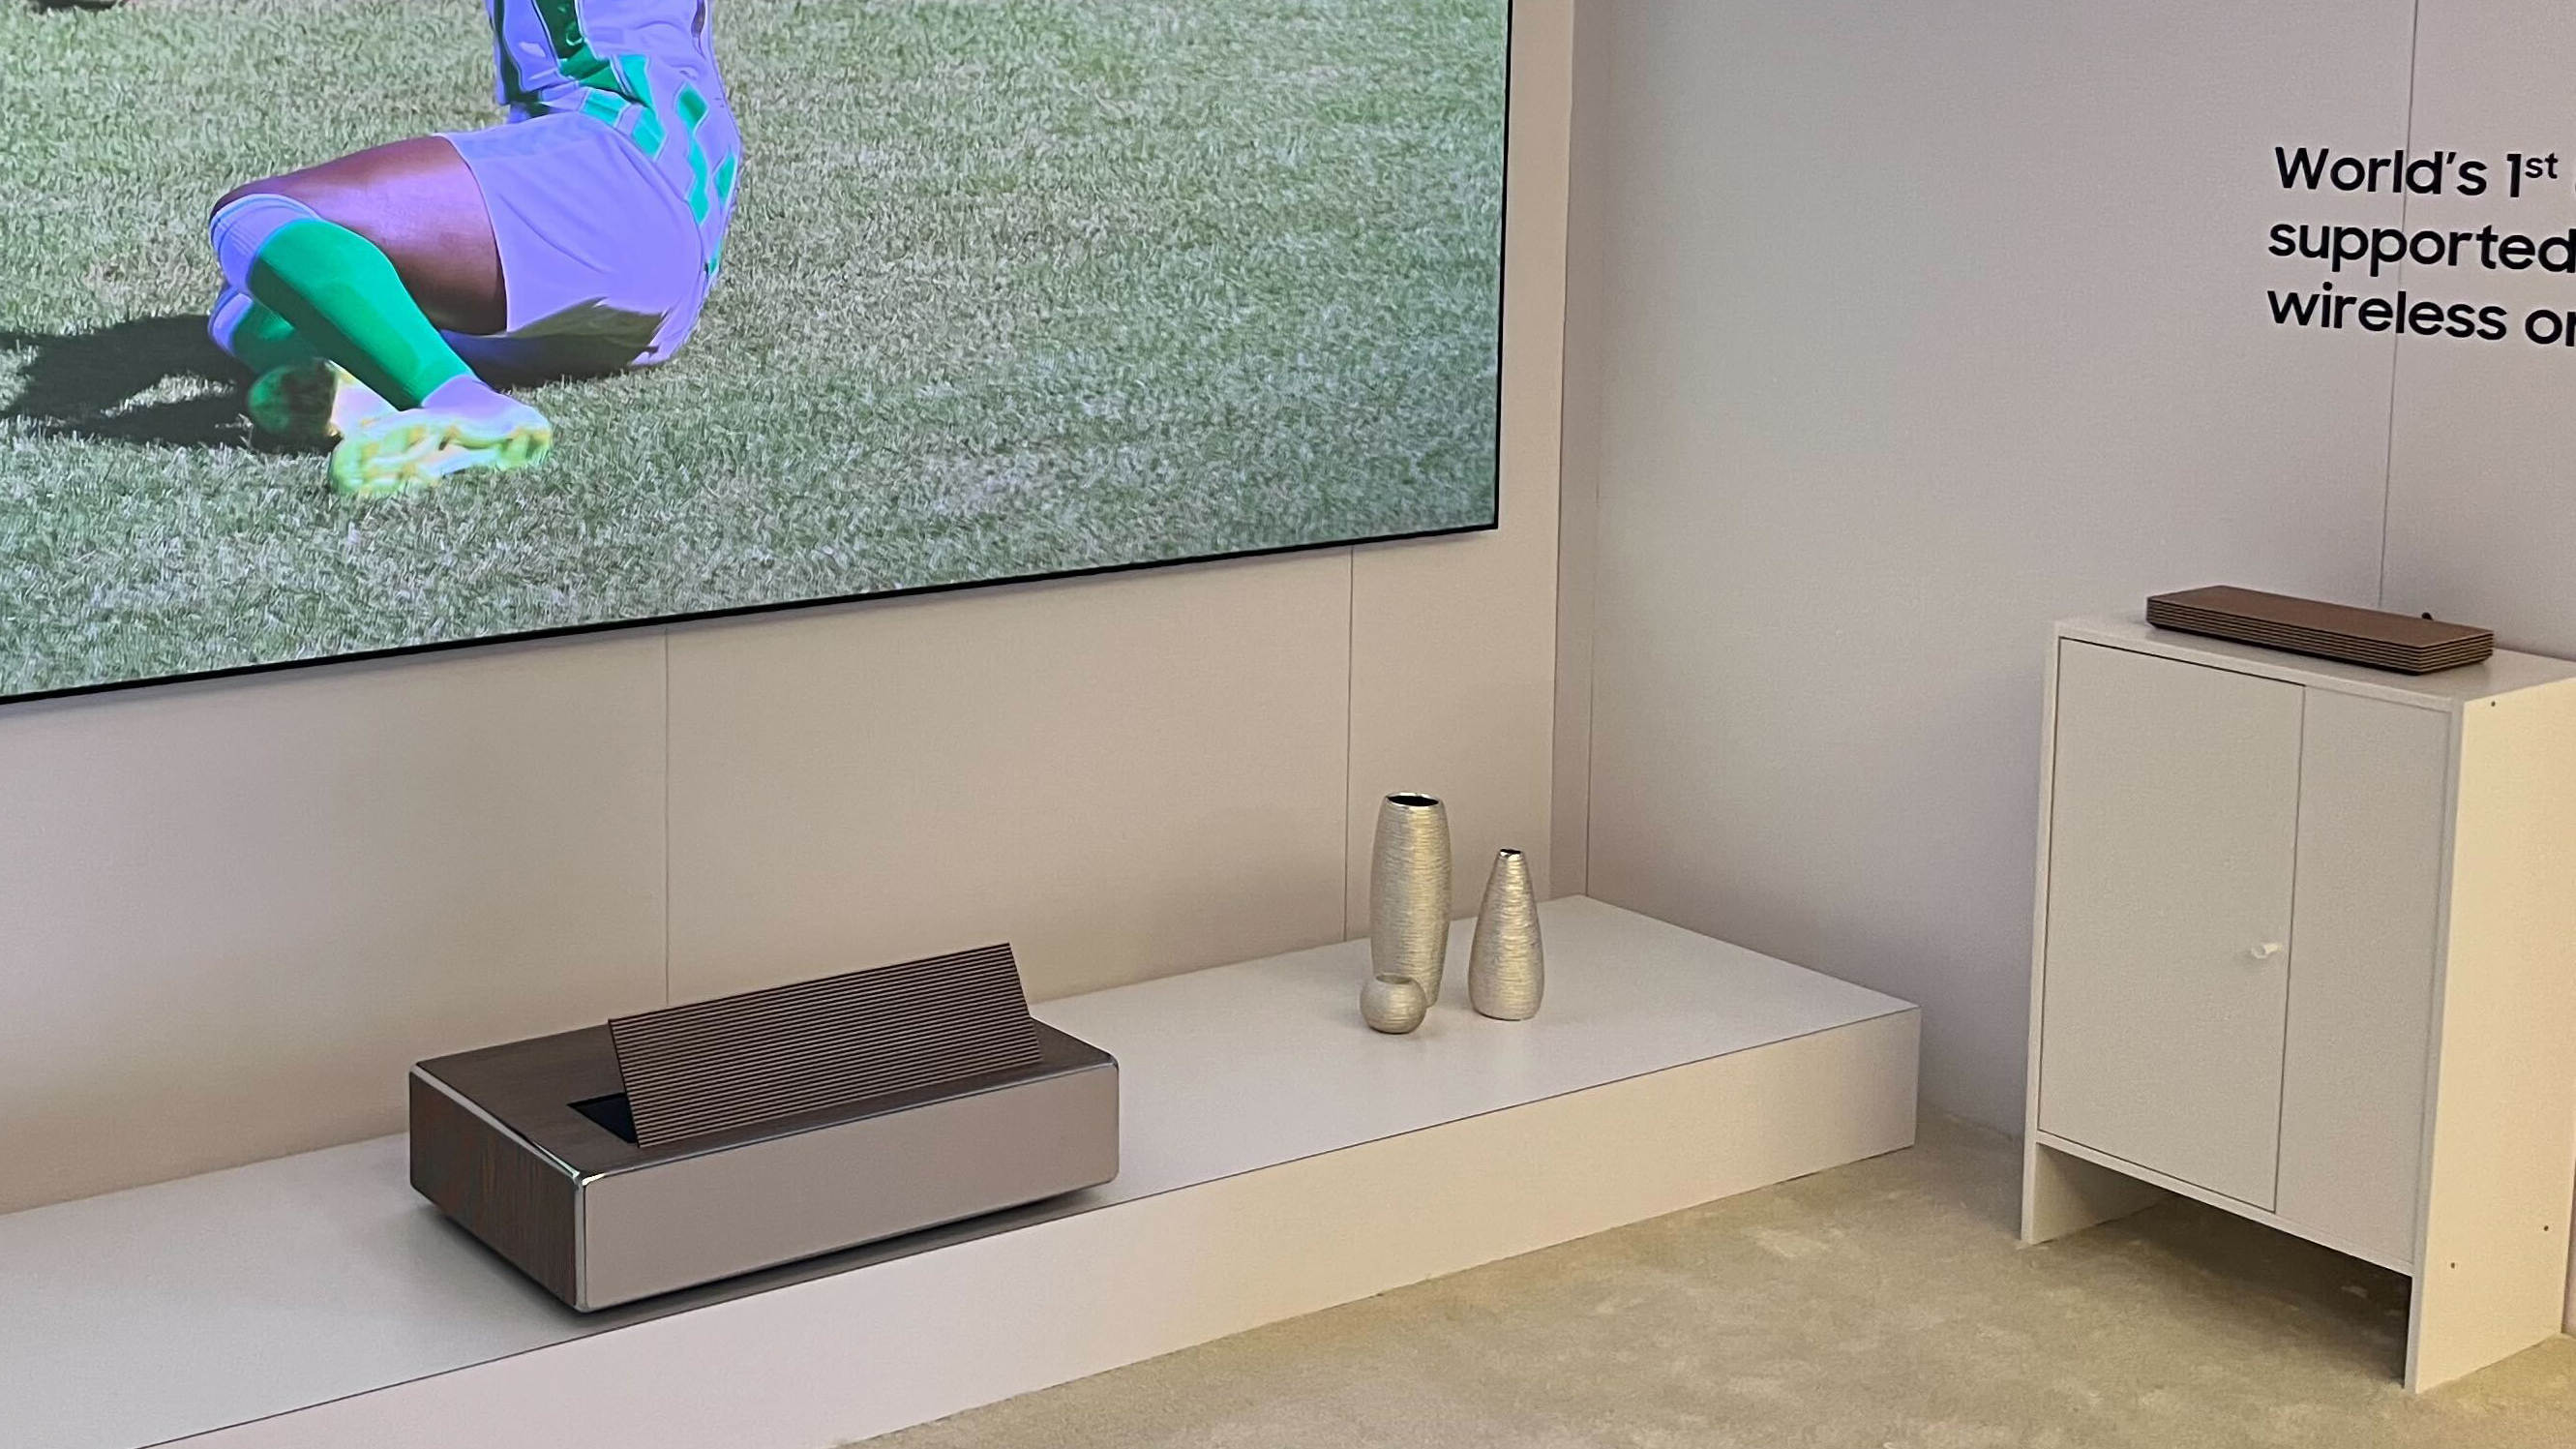 Samsung The Premiere 8K projecting a football match, with its wireless connection box on a separate unit